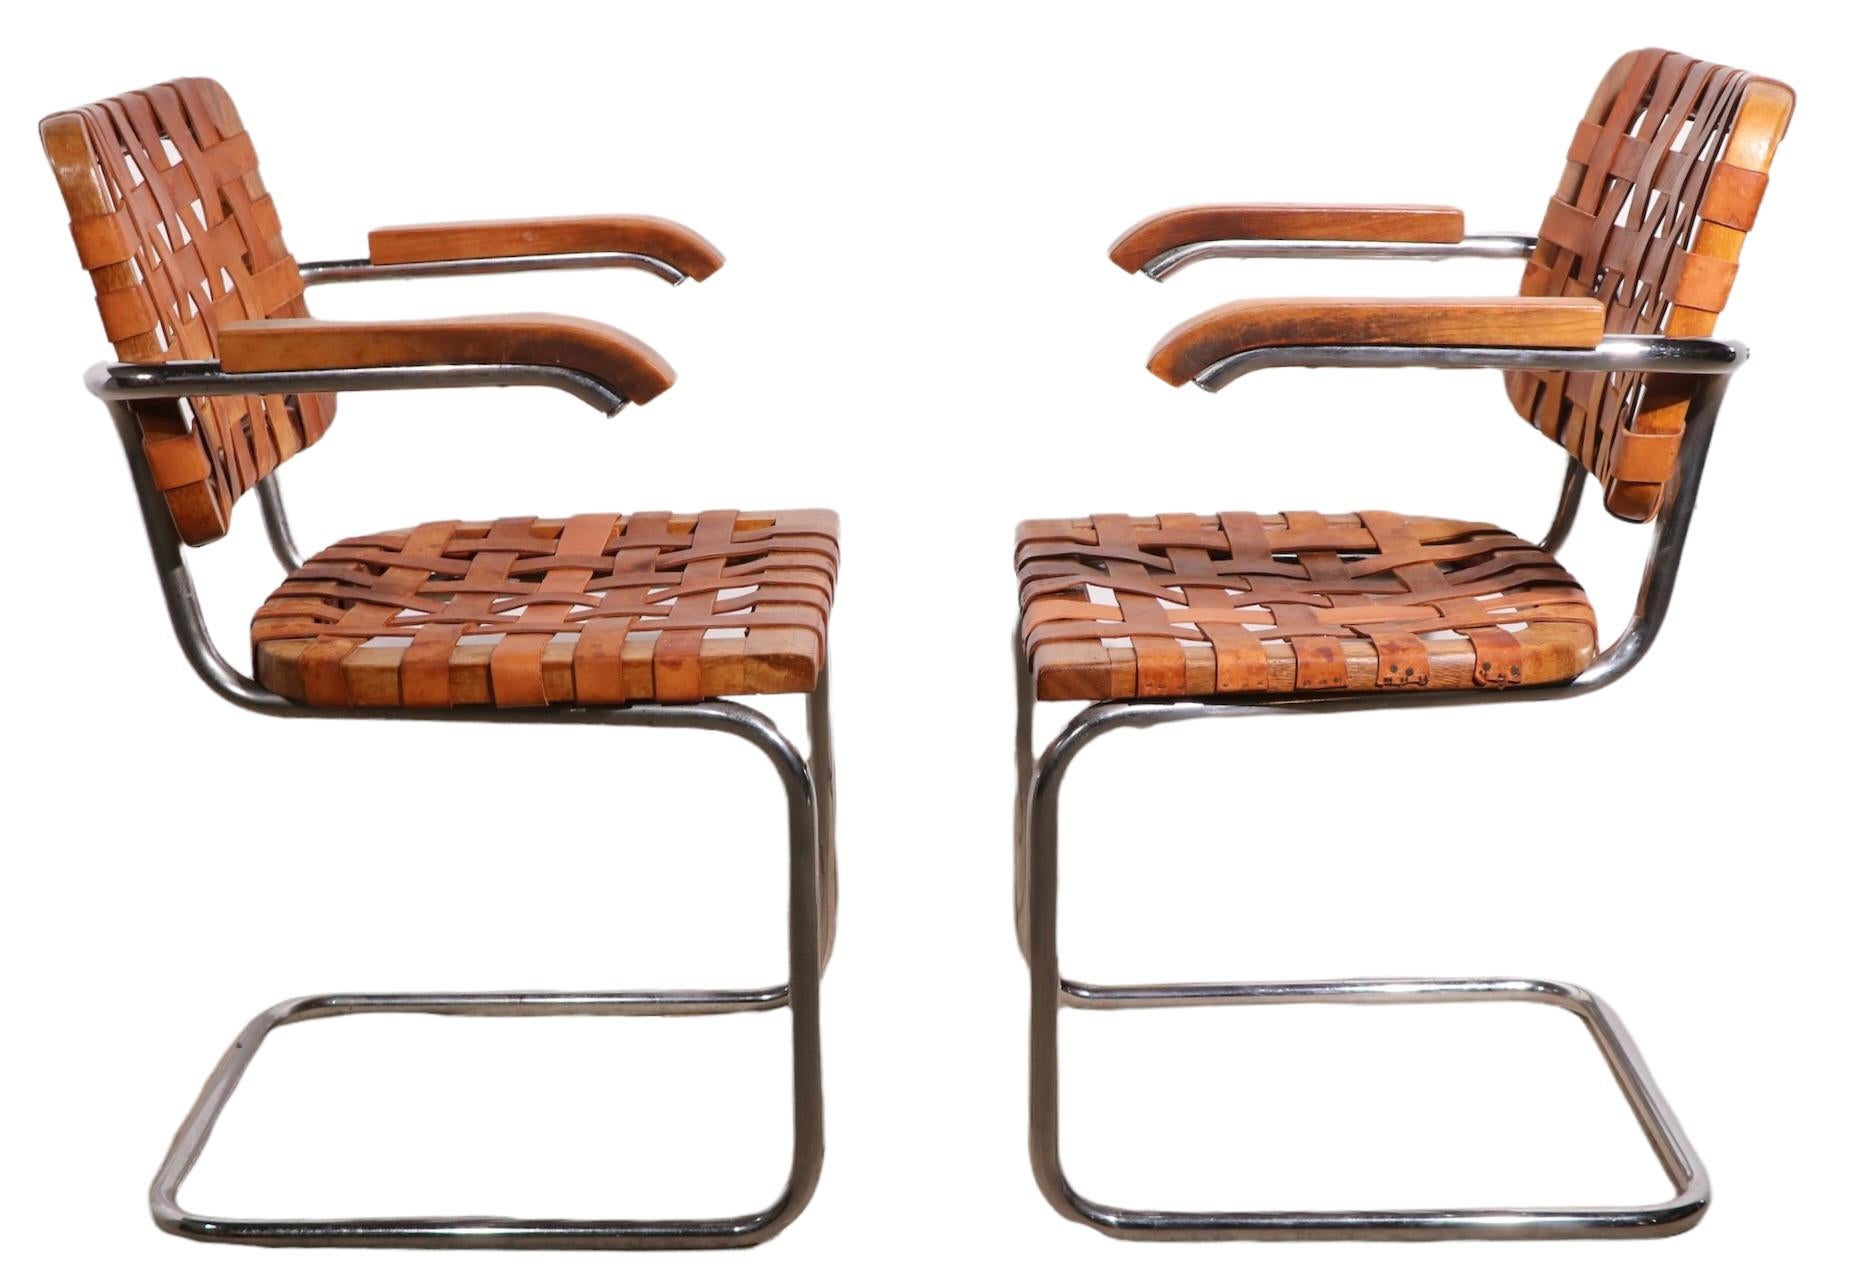 Bauhaus Pr. Unusual Cesca Dining Arm Chairs Designed by Breuer Made in Italy, Ca. 1970's For Sale